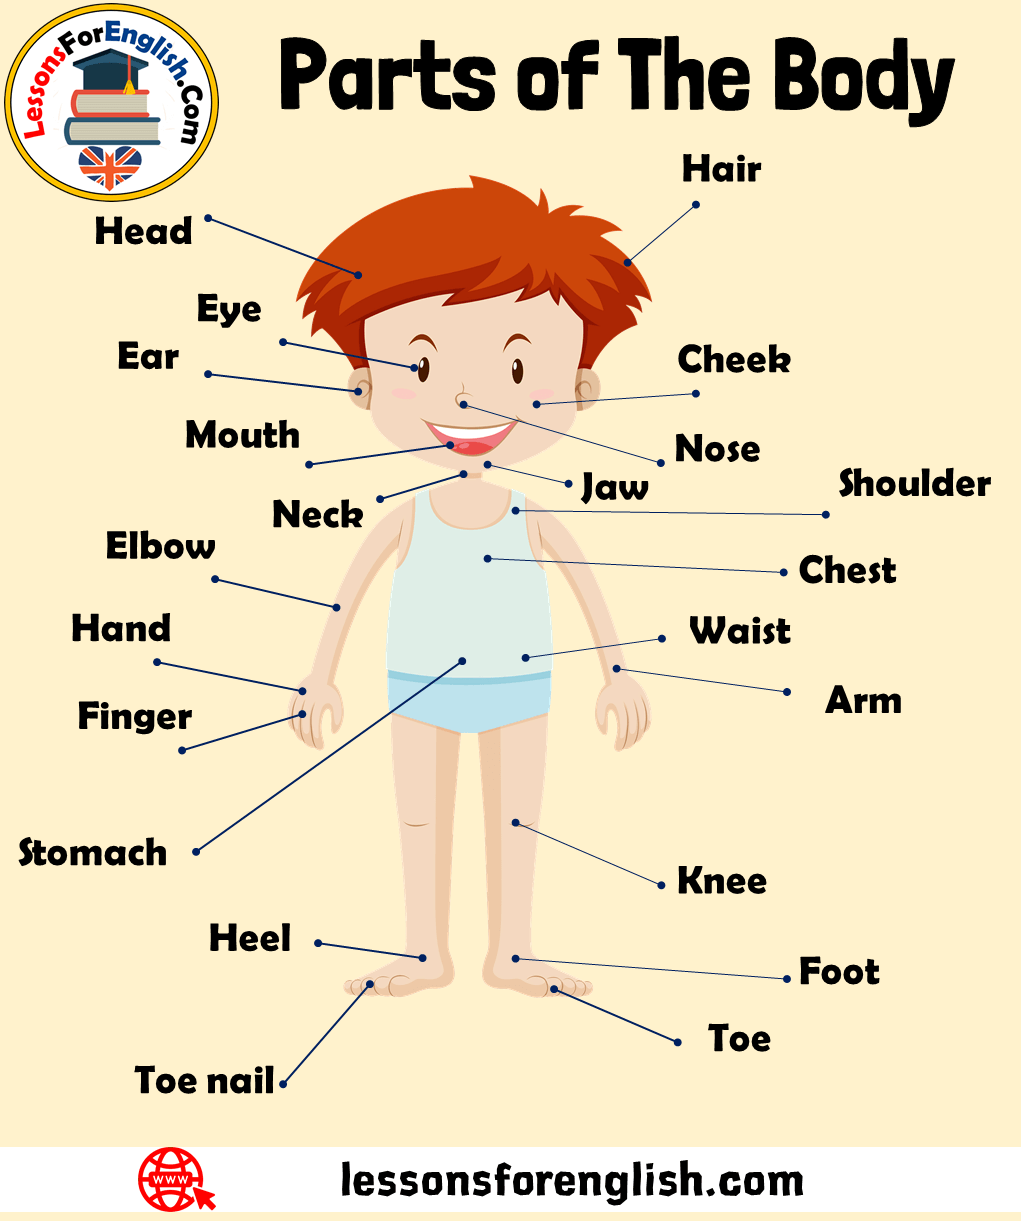 Human Body Parts Names, Organs in the Body, Expressions and Examples -  Lessons For English